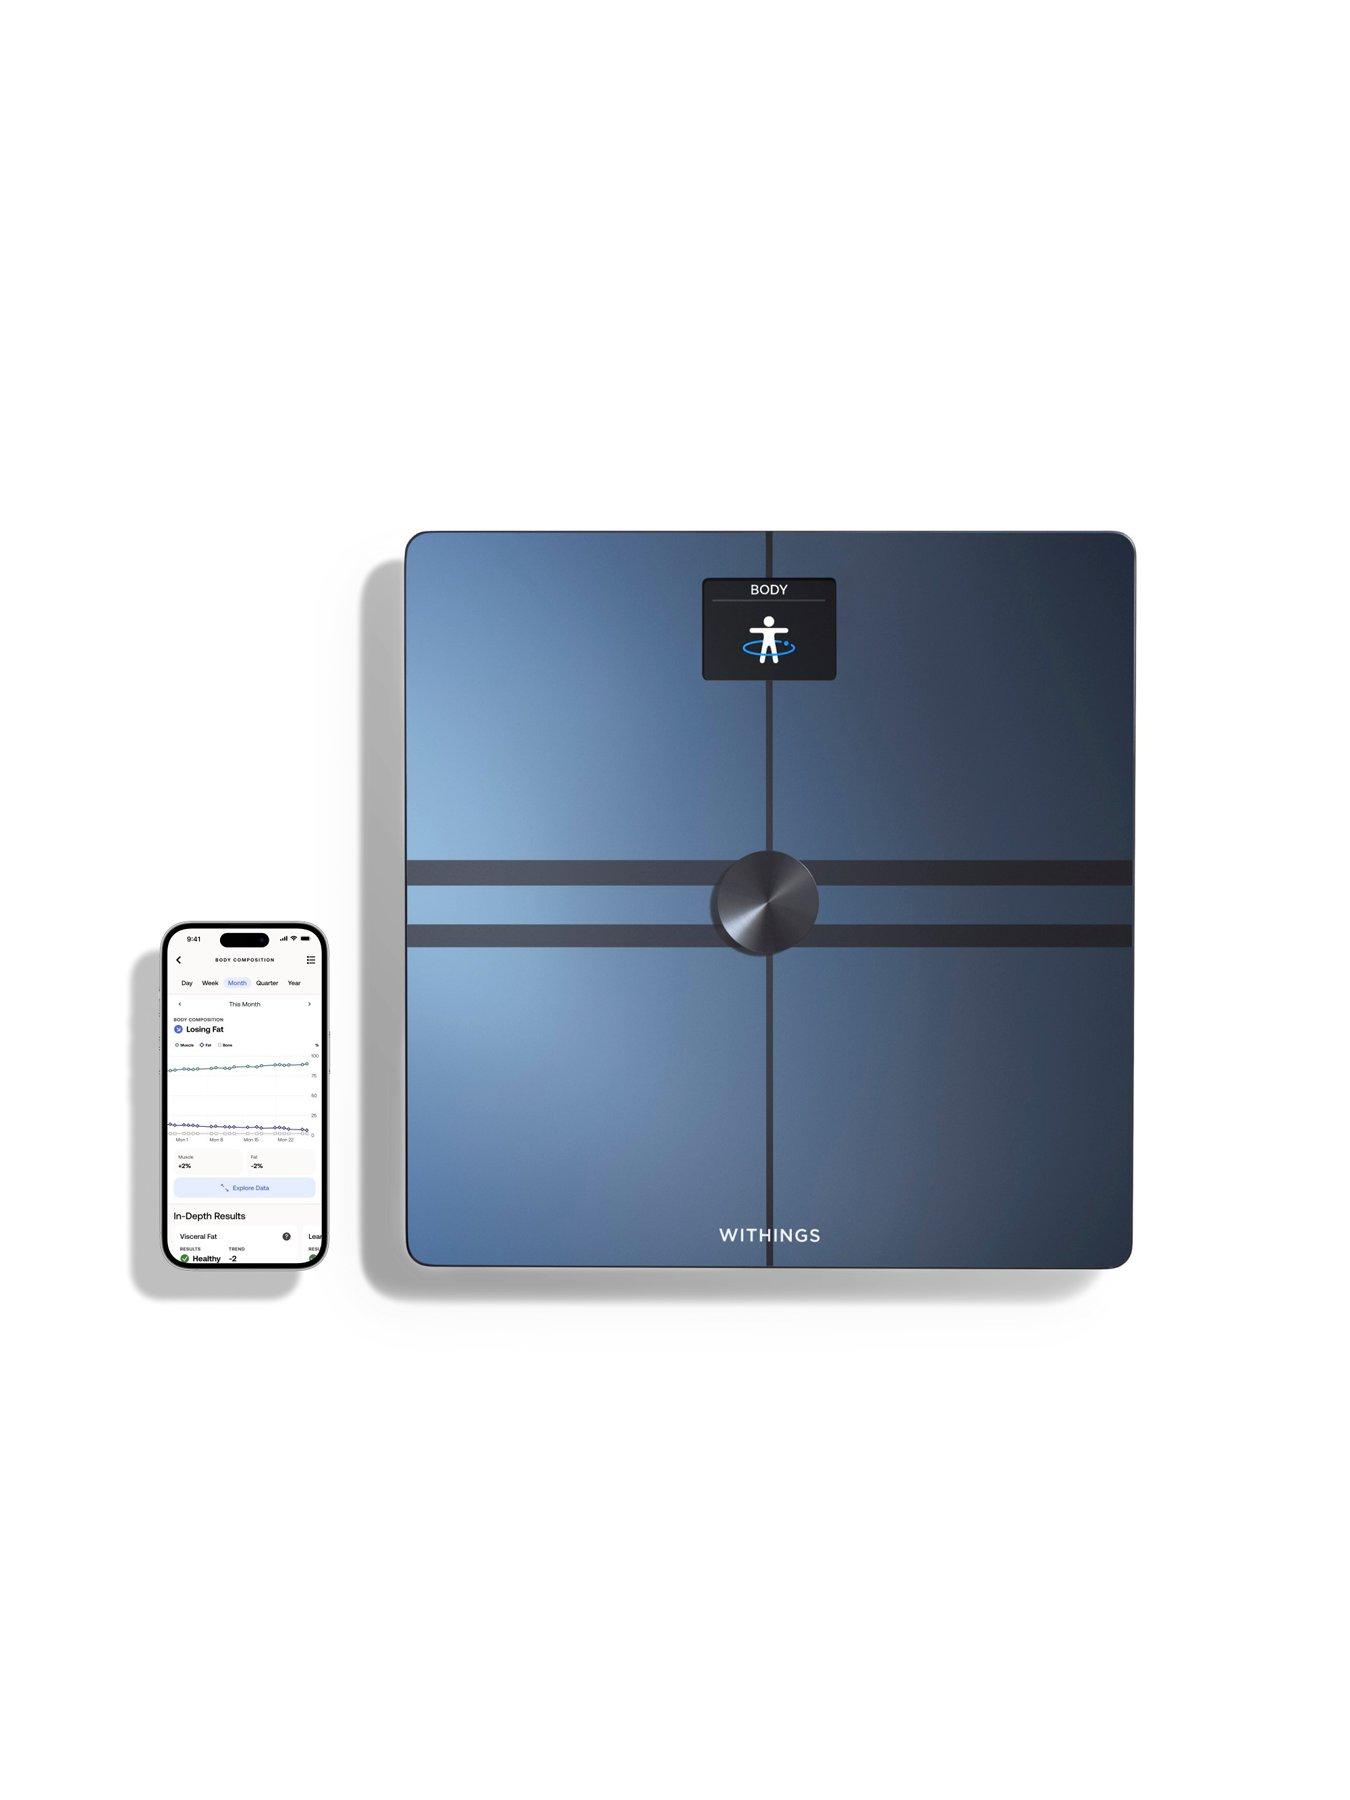 I Tried Withings Body Plus Composition to Lose Weight and Reduce